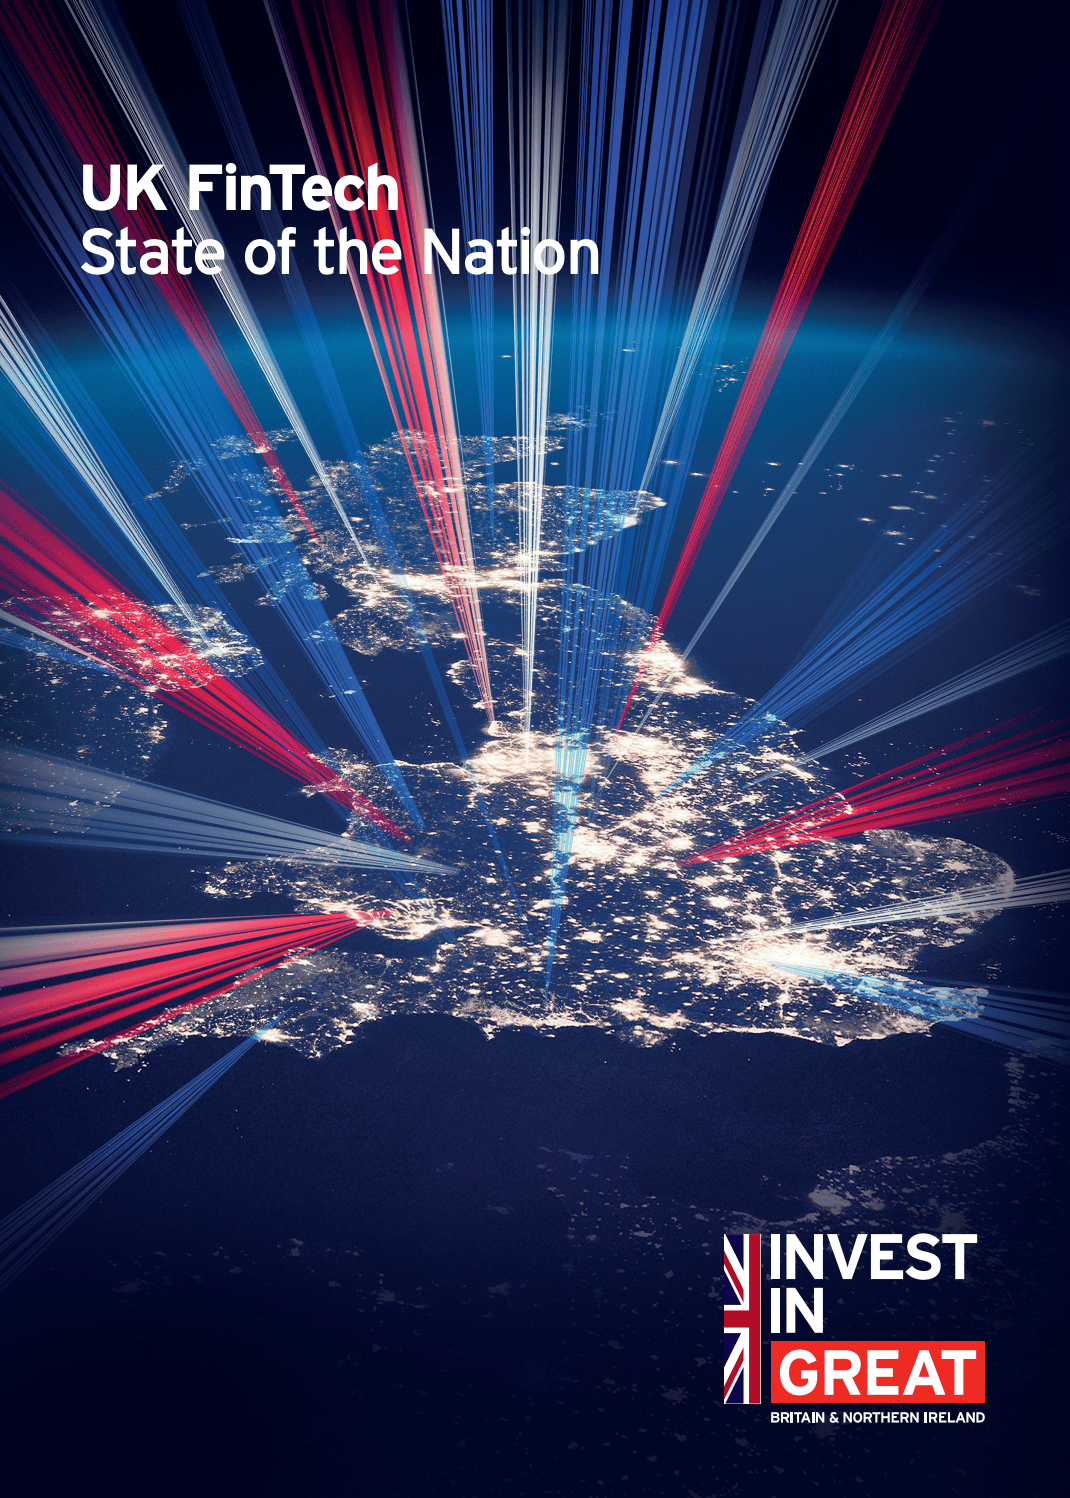 UK FinTech State of the Nation